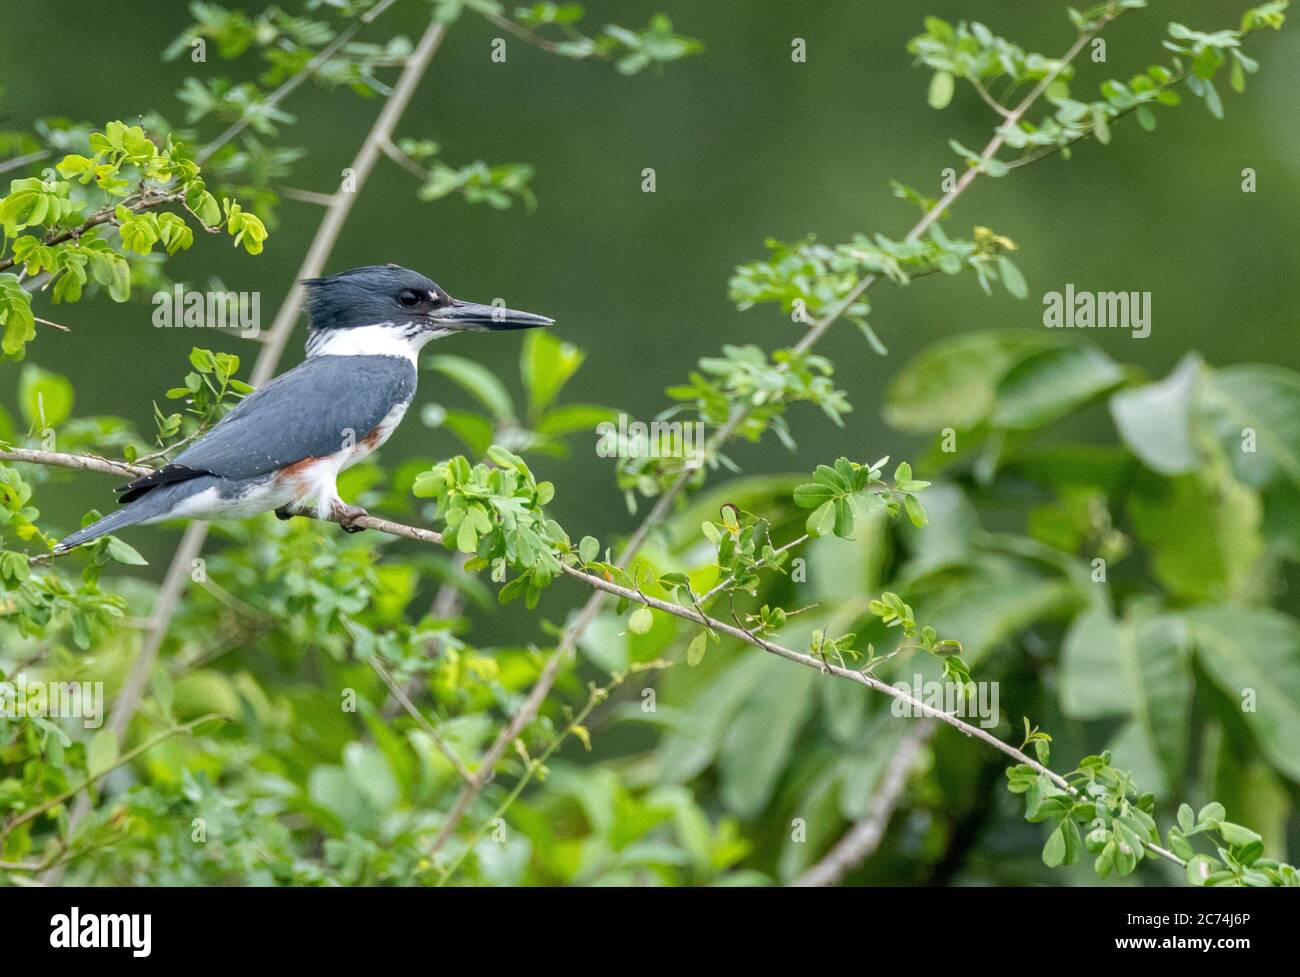 belted kingfisher (Megaceryle alcyon, Ceryle alcyon), perches on a twig, Guatemala, Laguna del tigre National Park Stock Photo